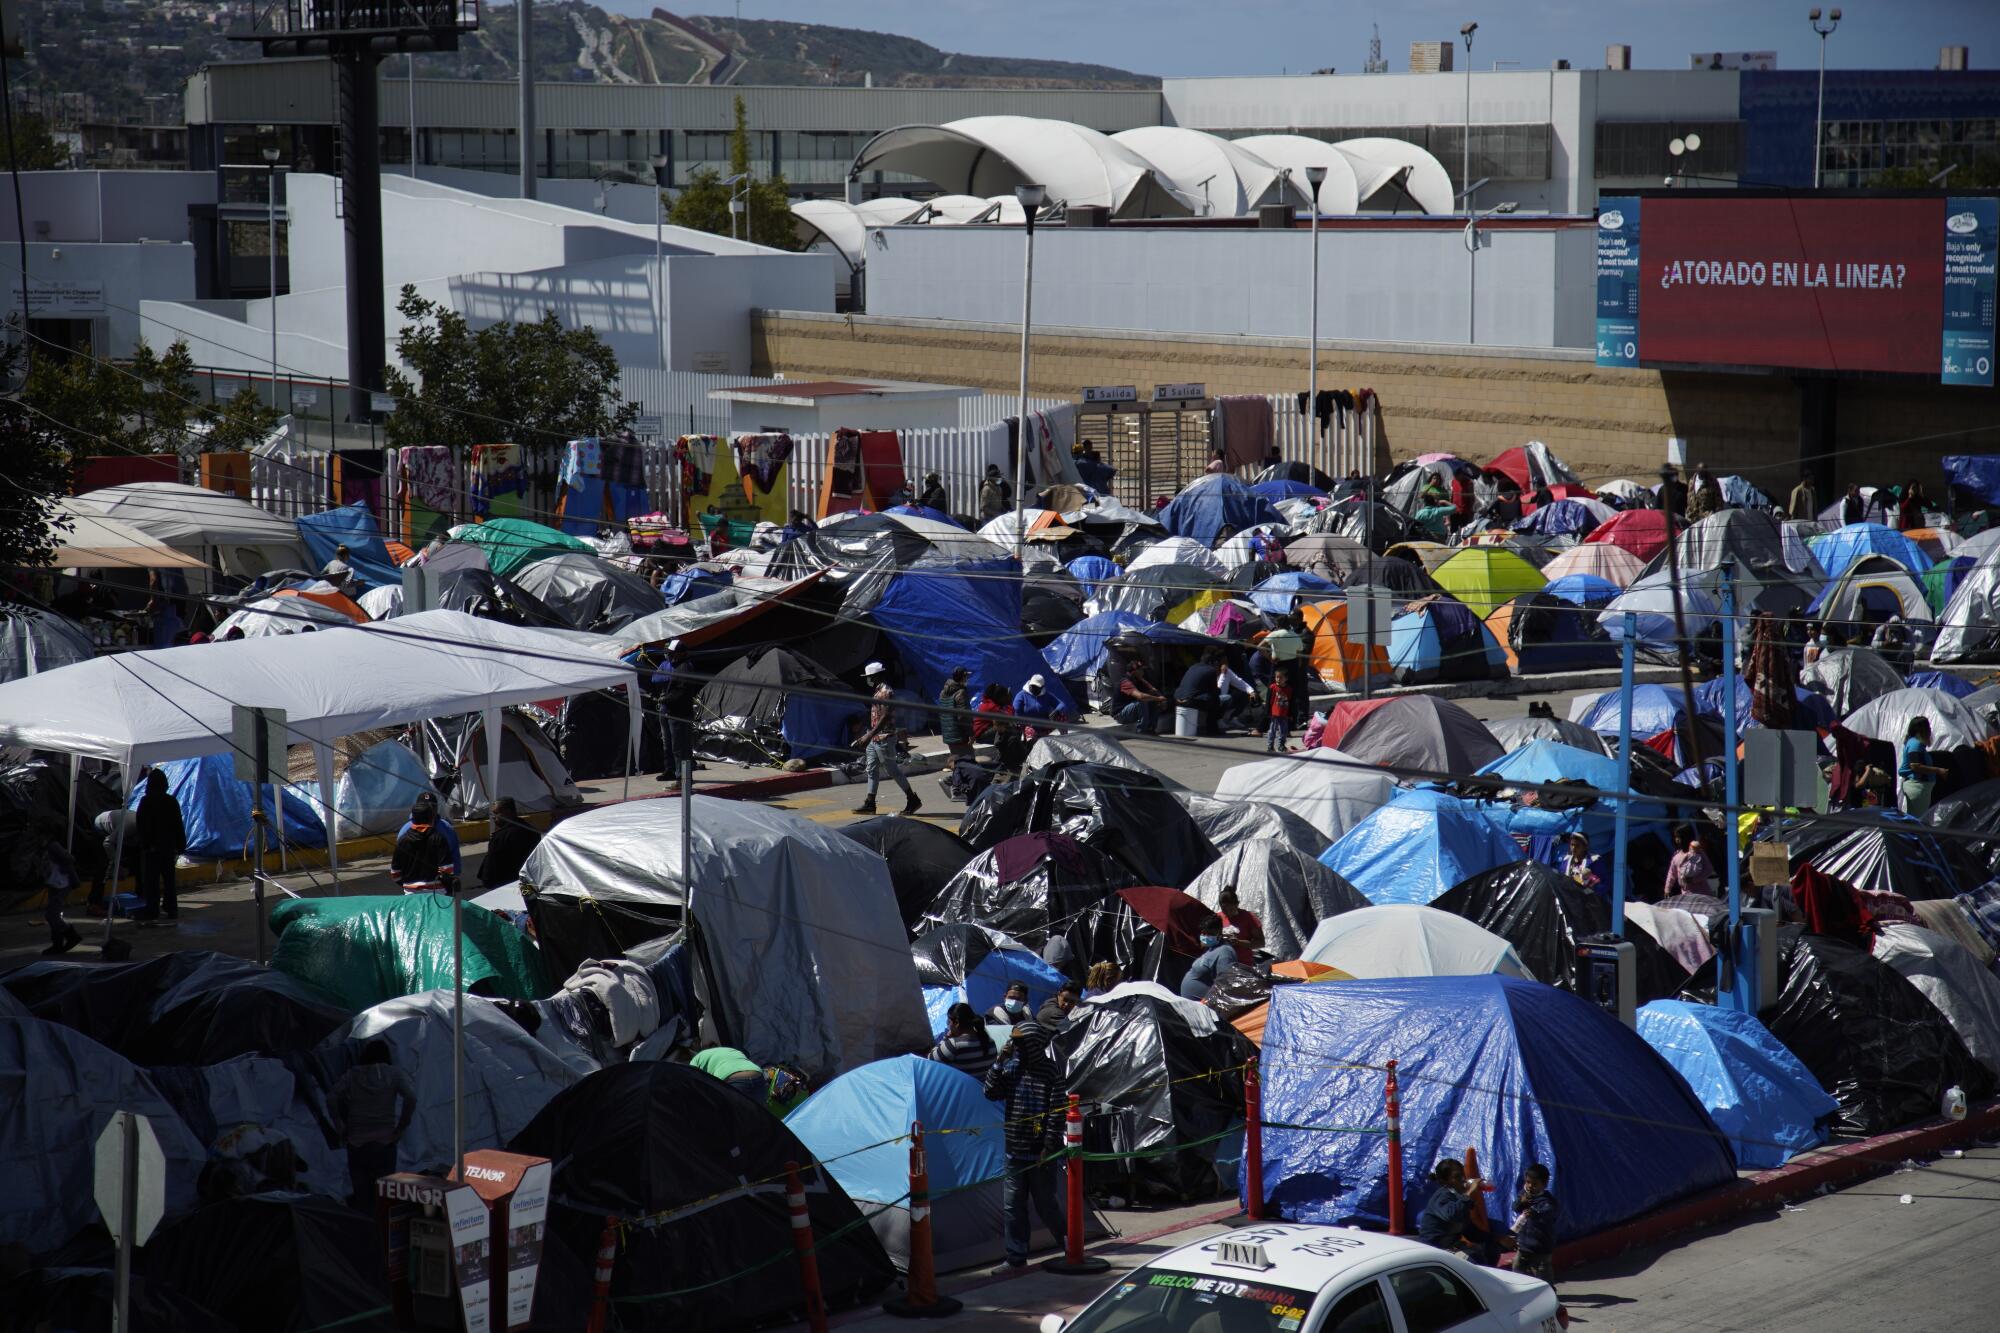 Hundreds of asylum seekers have set up camp by the port of entry at Tijuana's Chaparral plaza.